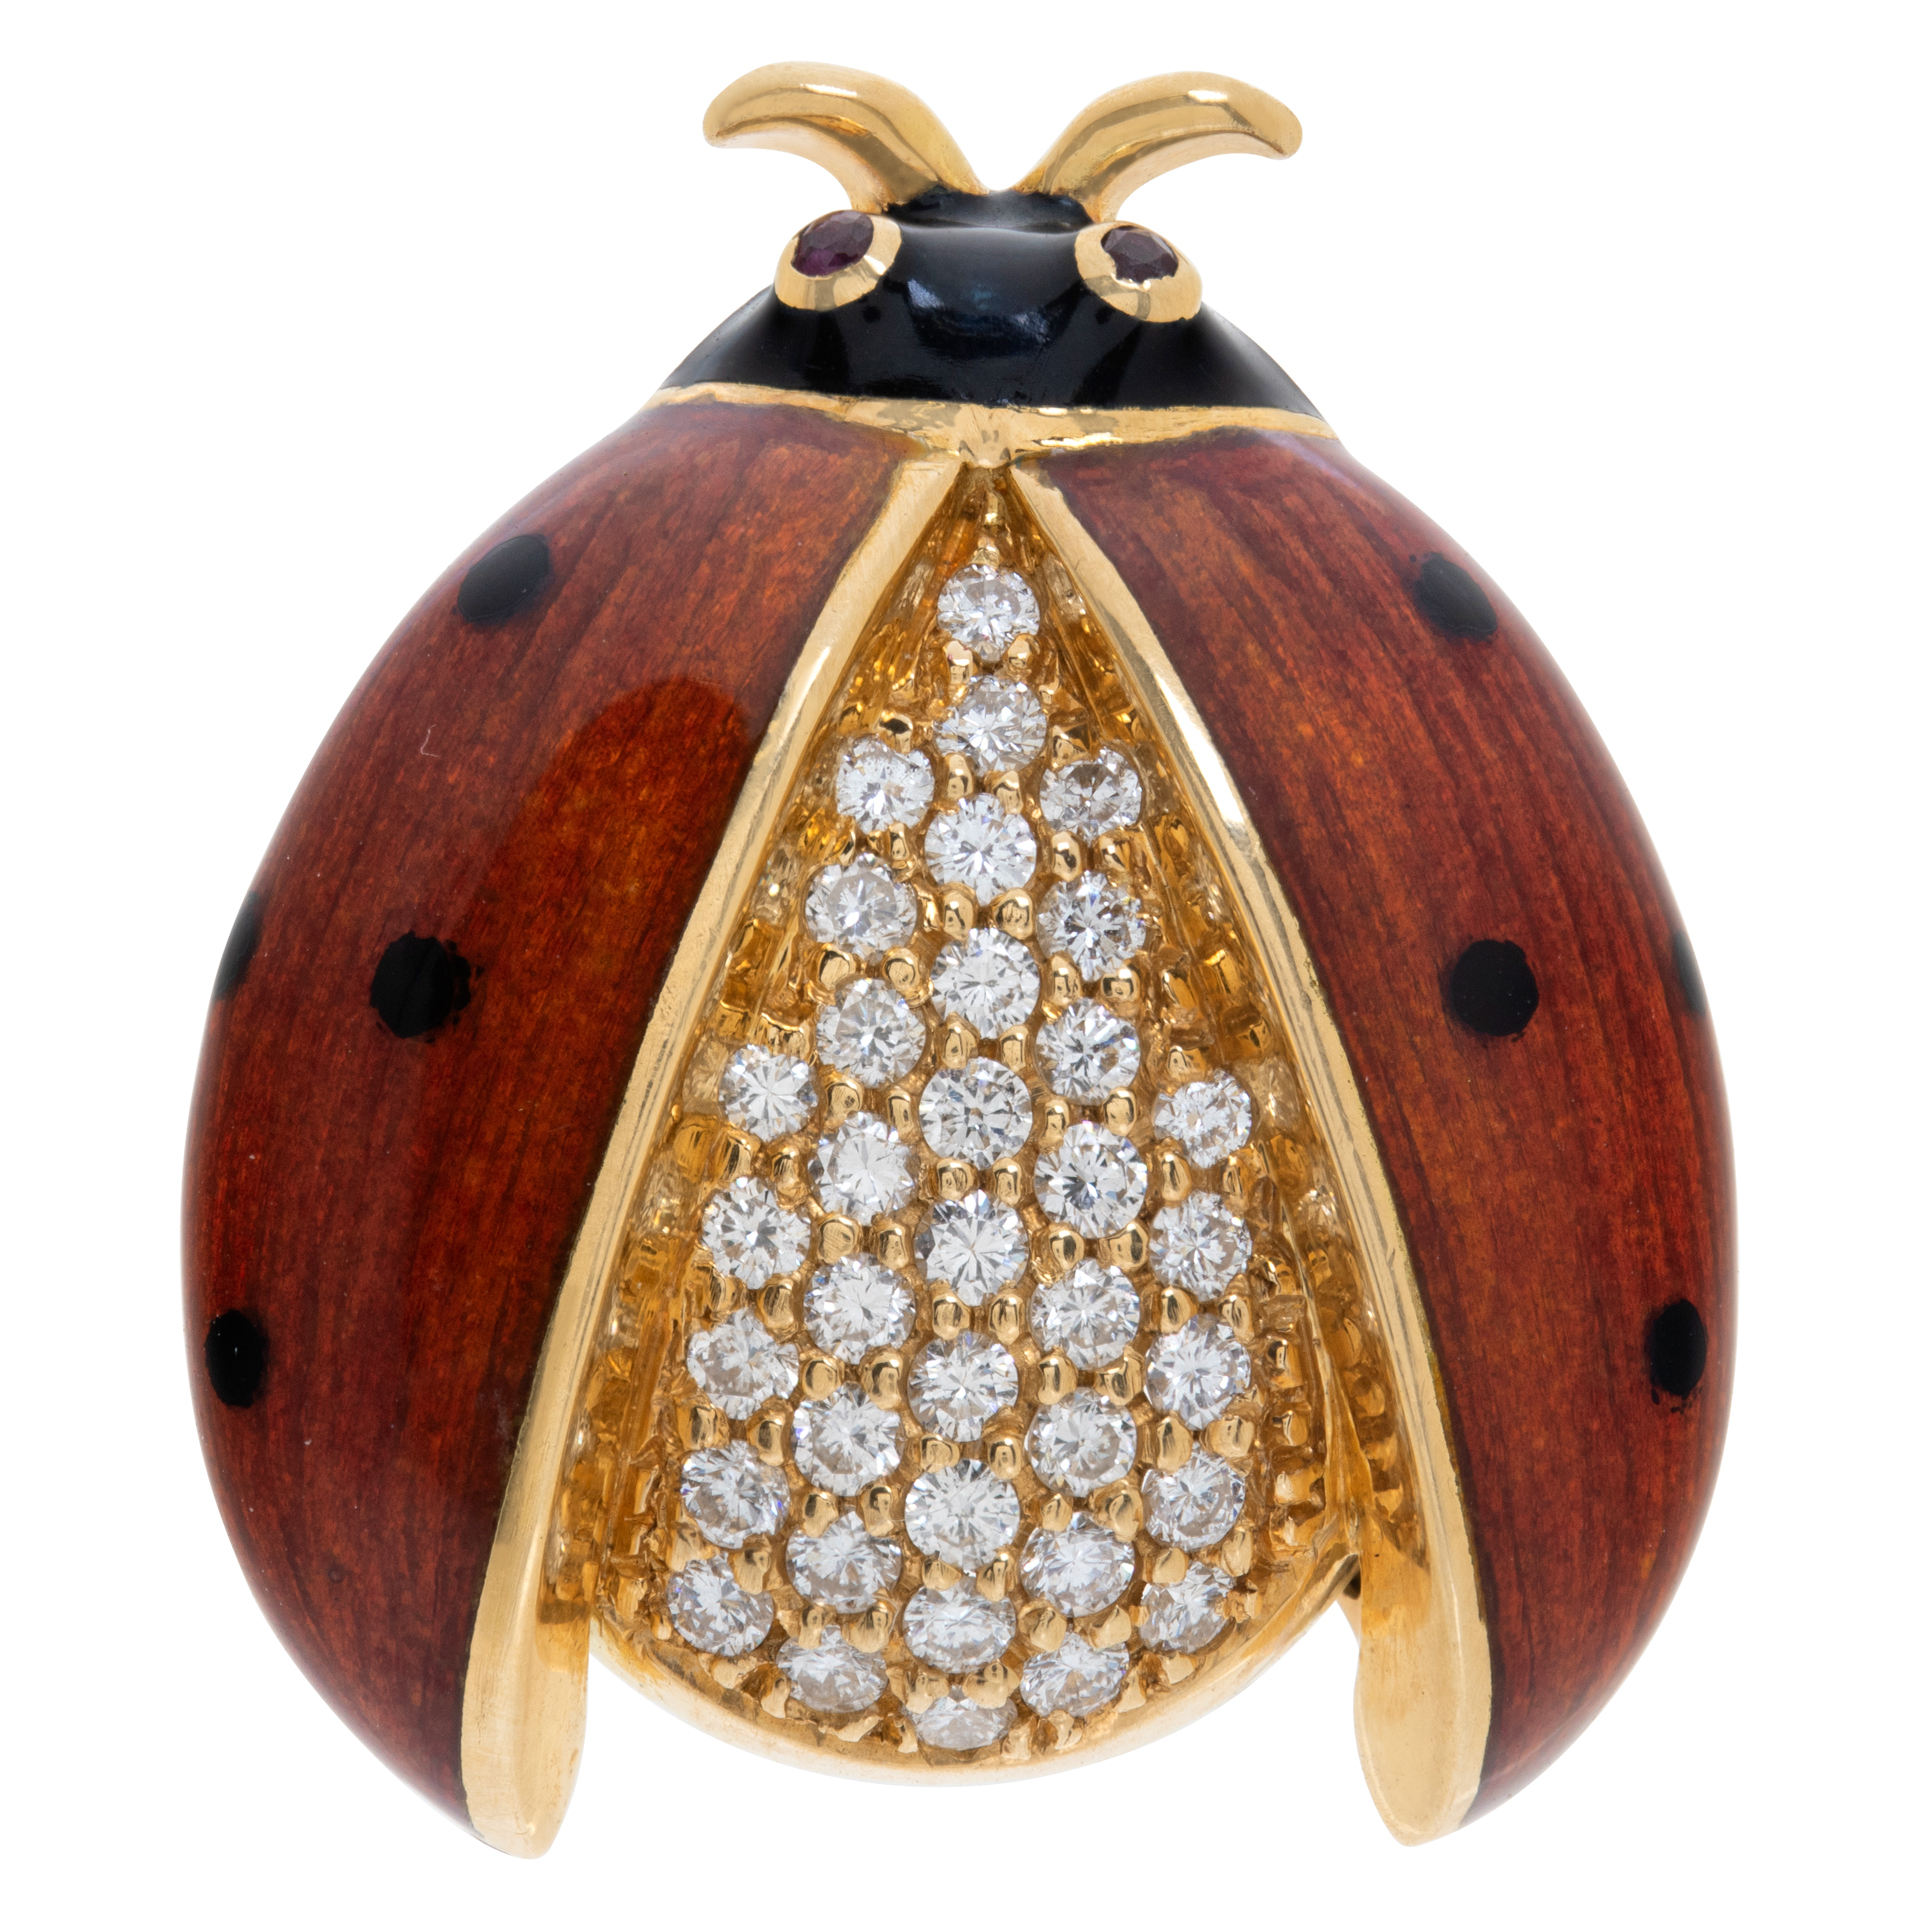 Lucky lady bug diamonds brooch in 18k gold, with ruby eyes, red/ black enamel head & wings, pave diamonds body total approx. weight: 0.75 carats.